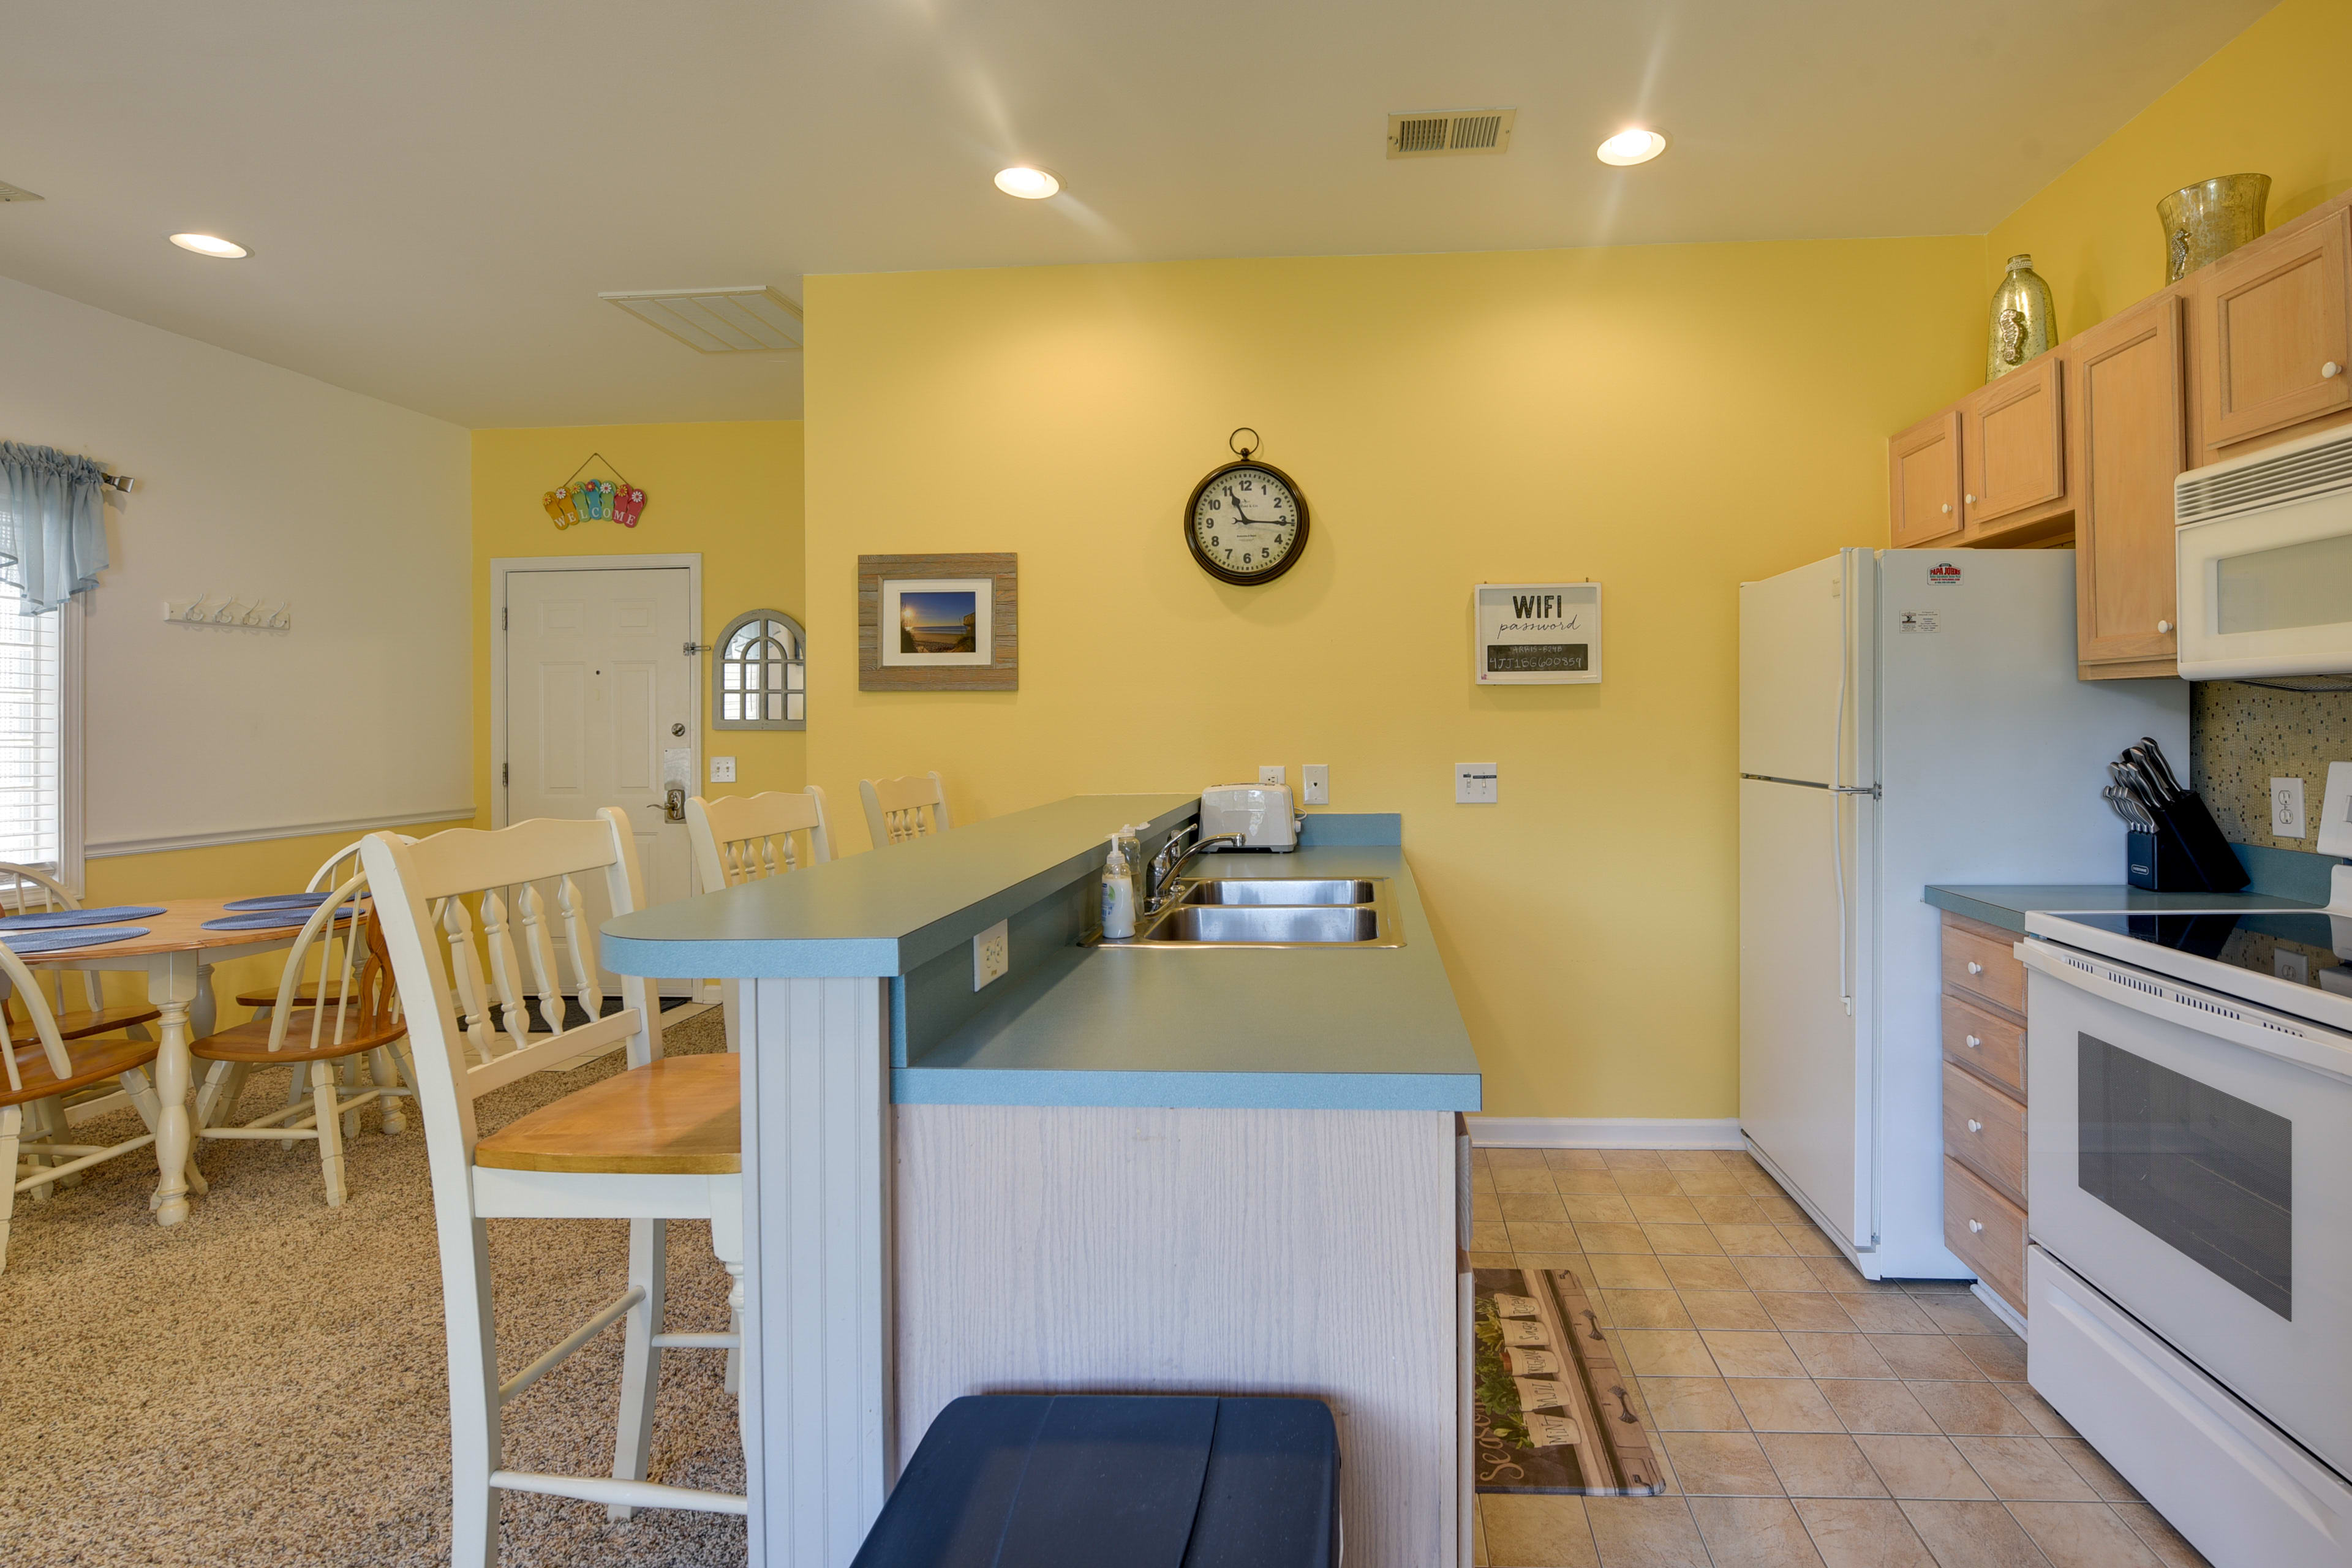 Kitchen | Dining Area | Cooking Basics | Coffee Maker